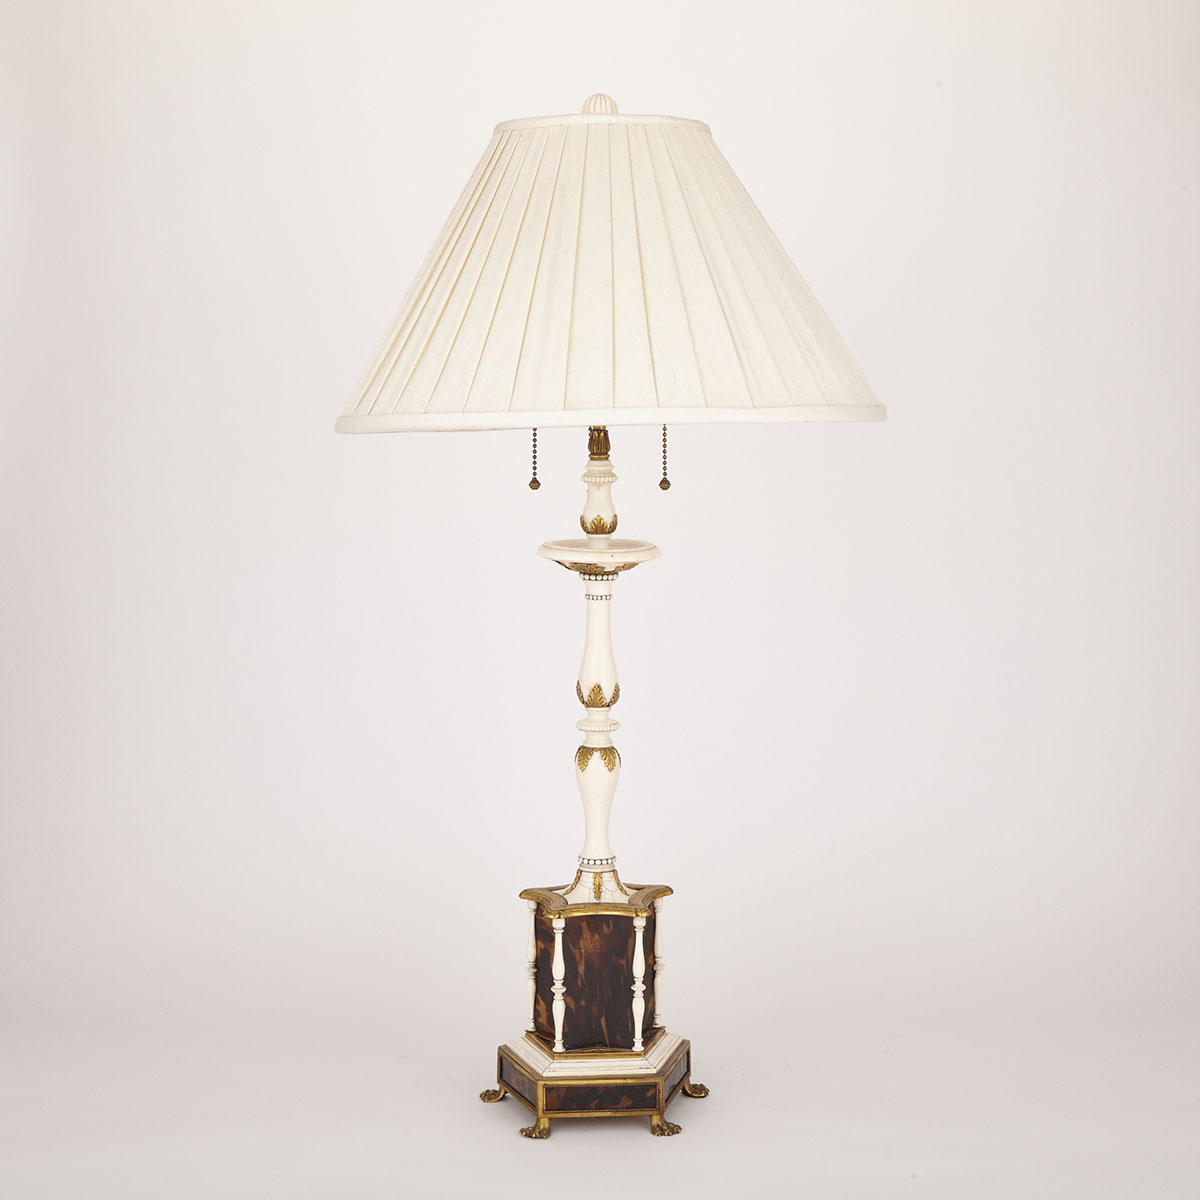 Ormolu Mounted Turned Ivory and Tortoiseshell Three Light Pricket Form Table Lamp, 19th/early 20th century